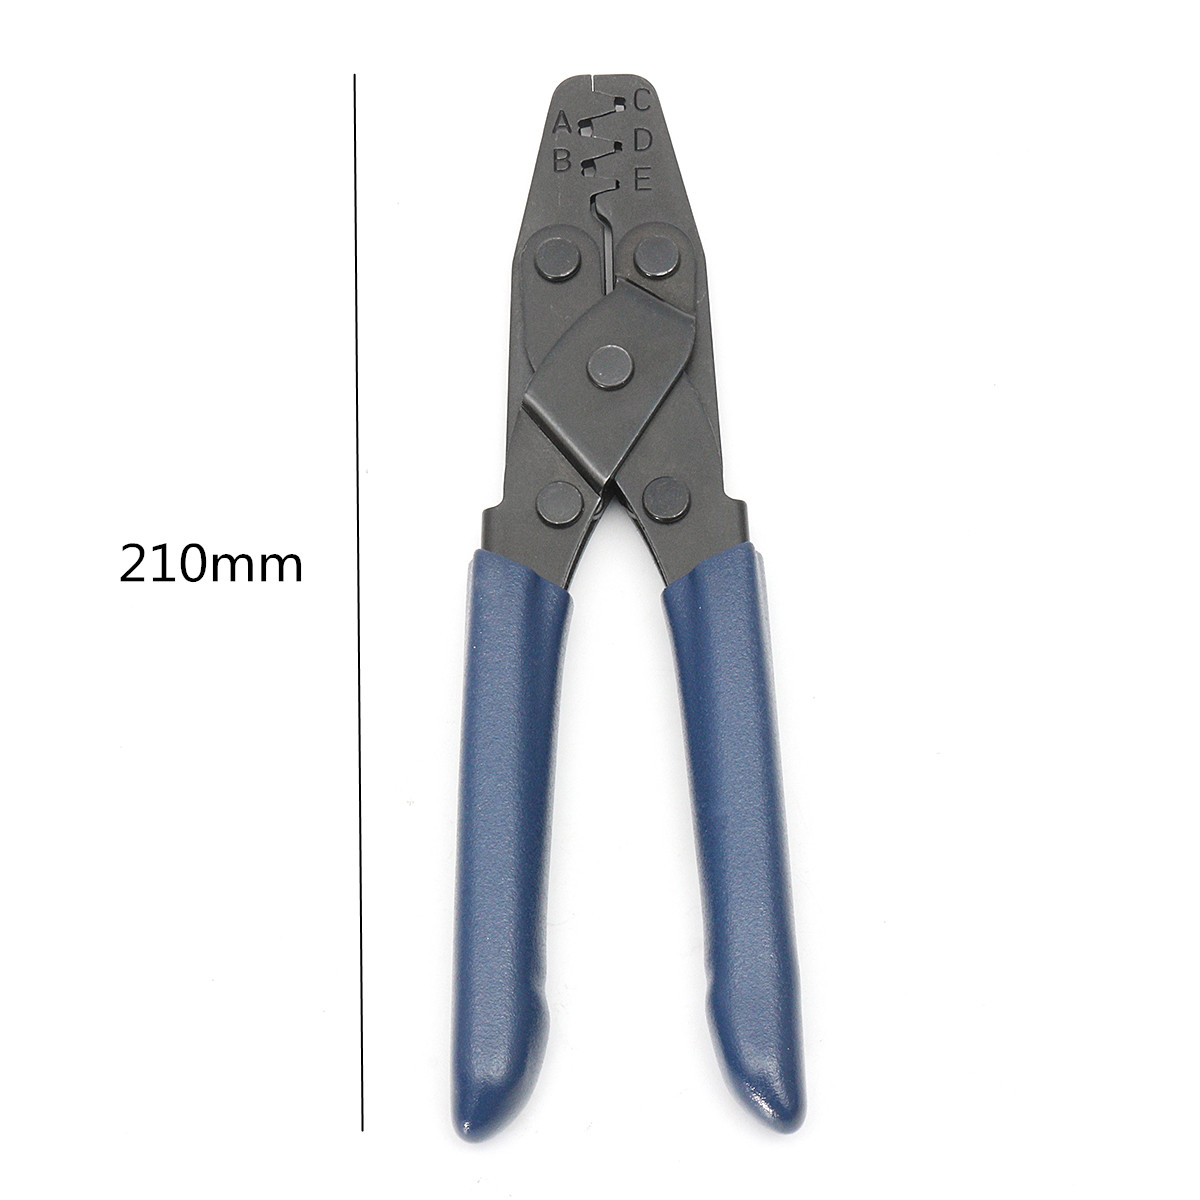 22-12-AWG-165-63mm2-Terminal-Crimp-Plier-Cable-Crimper-Wire-Stripper-Crimping-Tool-1131118-3